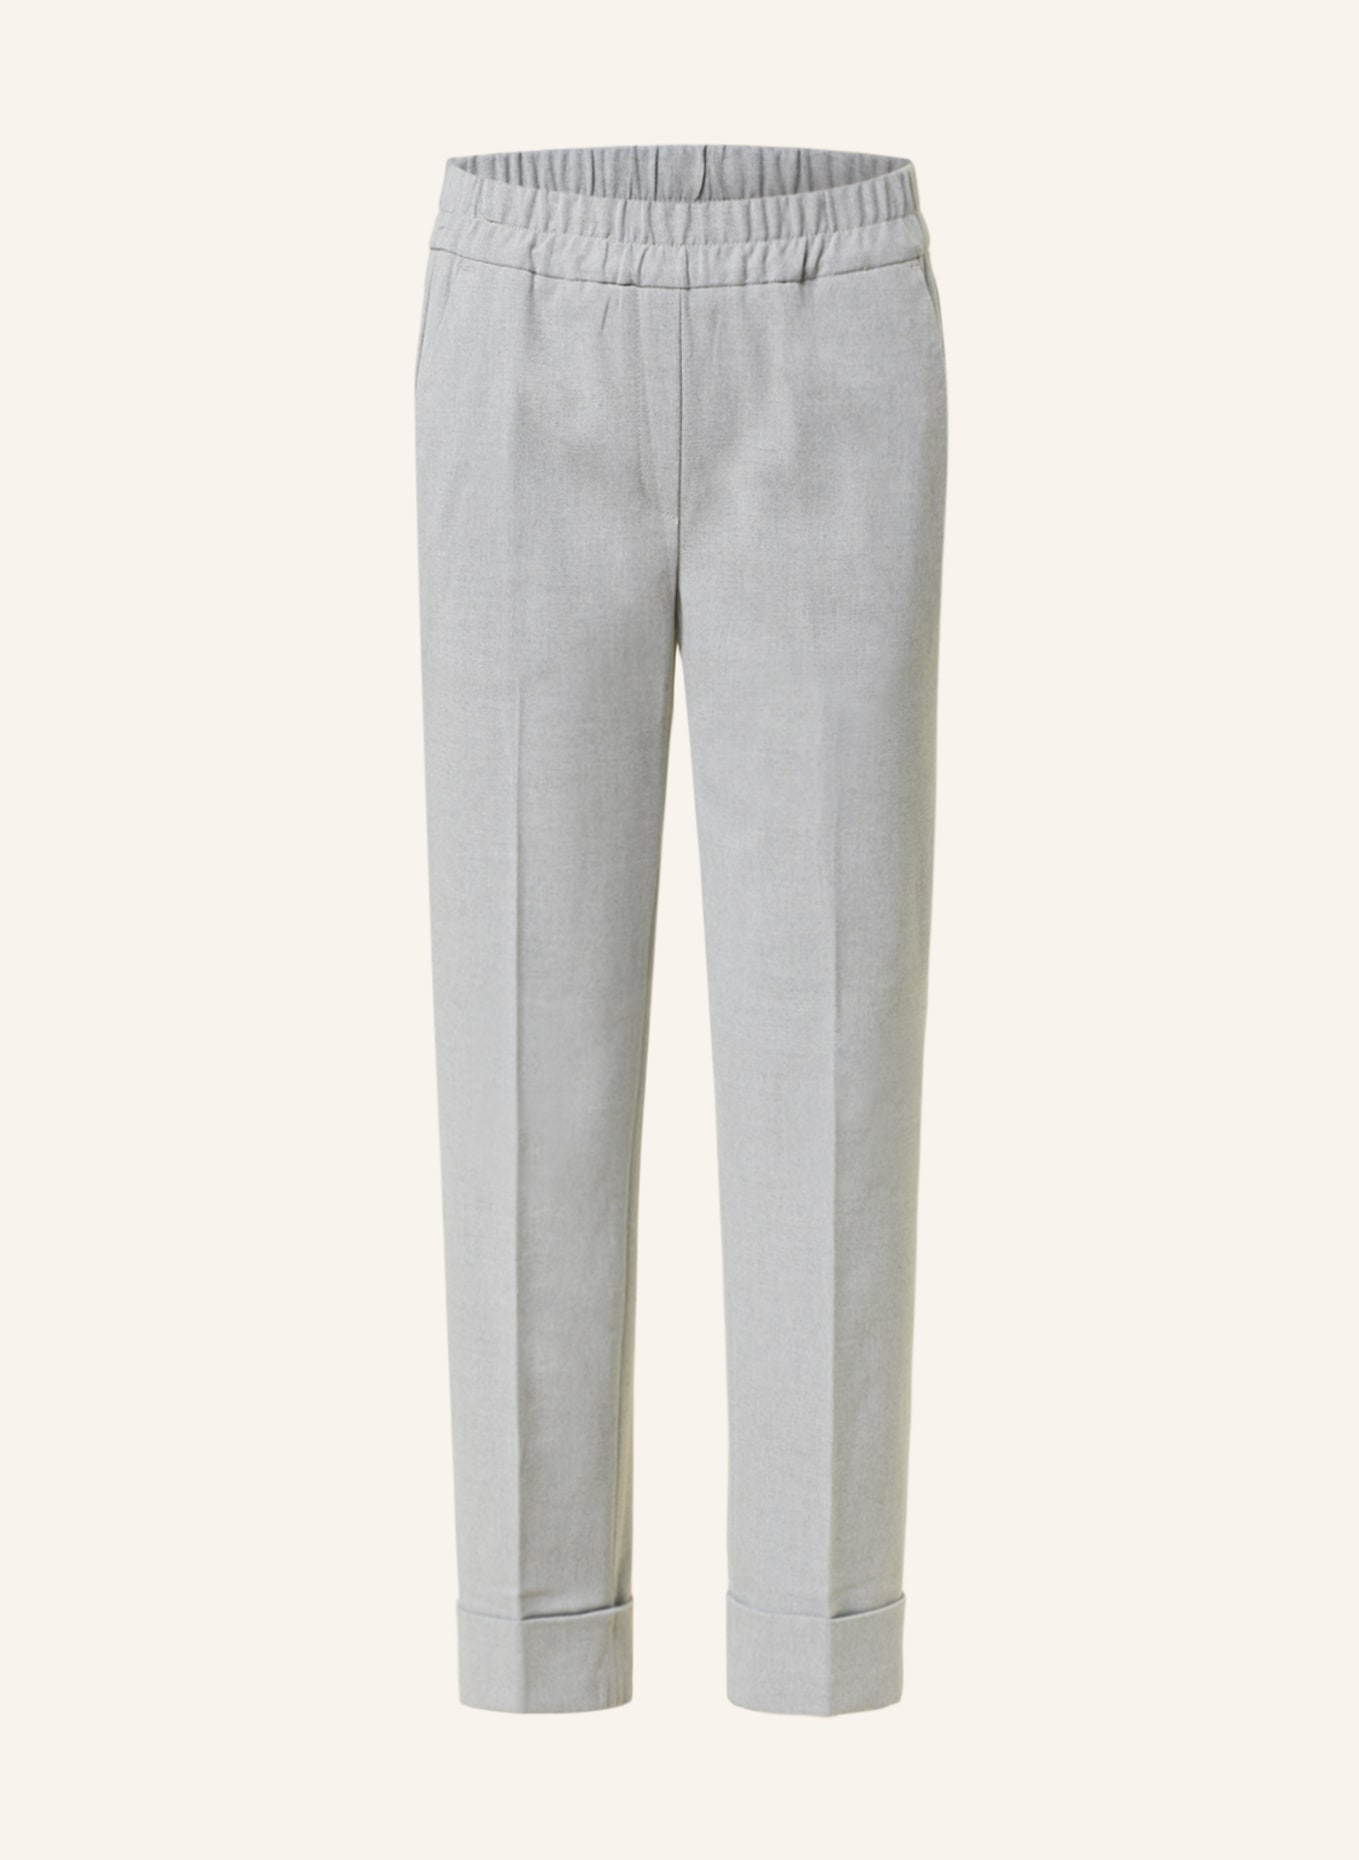 OPUS 7/8 trousers MAIKITO, Color: GRAY (Image 1)